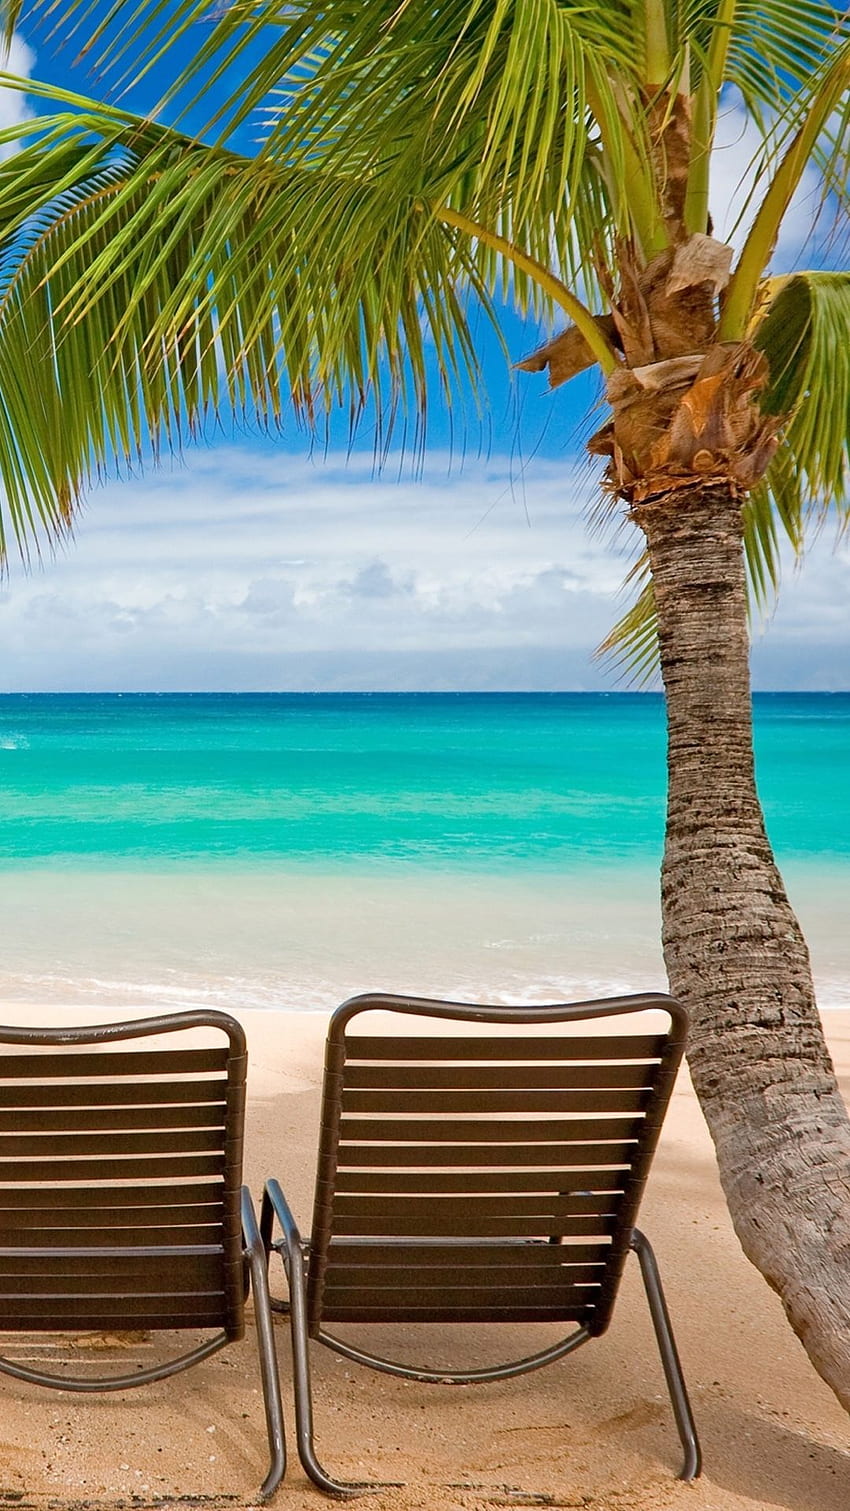 Weekends: A Shady Spot on the Beach for iPad, iPhone, and Apple Watch, Caribbean Beach iPhone HD phone wallpaper